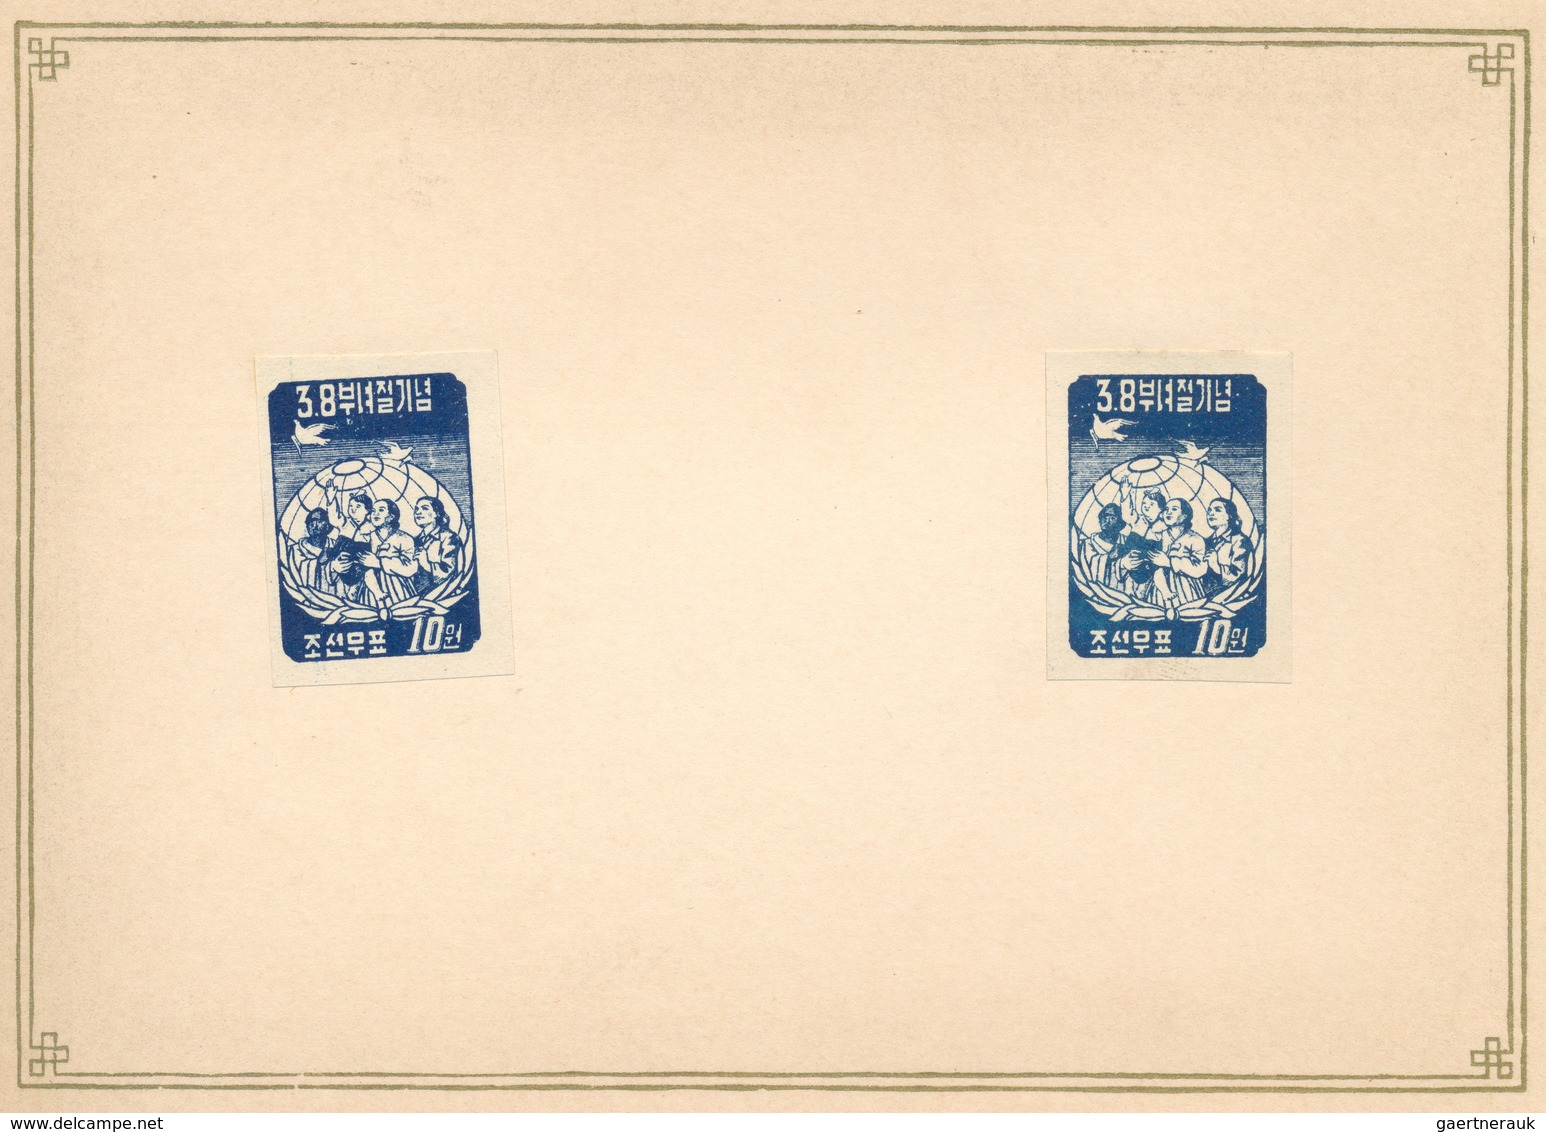 Korea-Nord: 1948/55, three presentation books with 1st printings only, issued without gum: golden ti